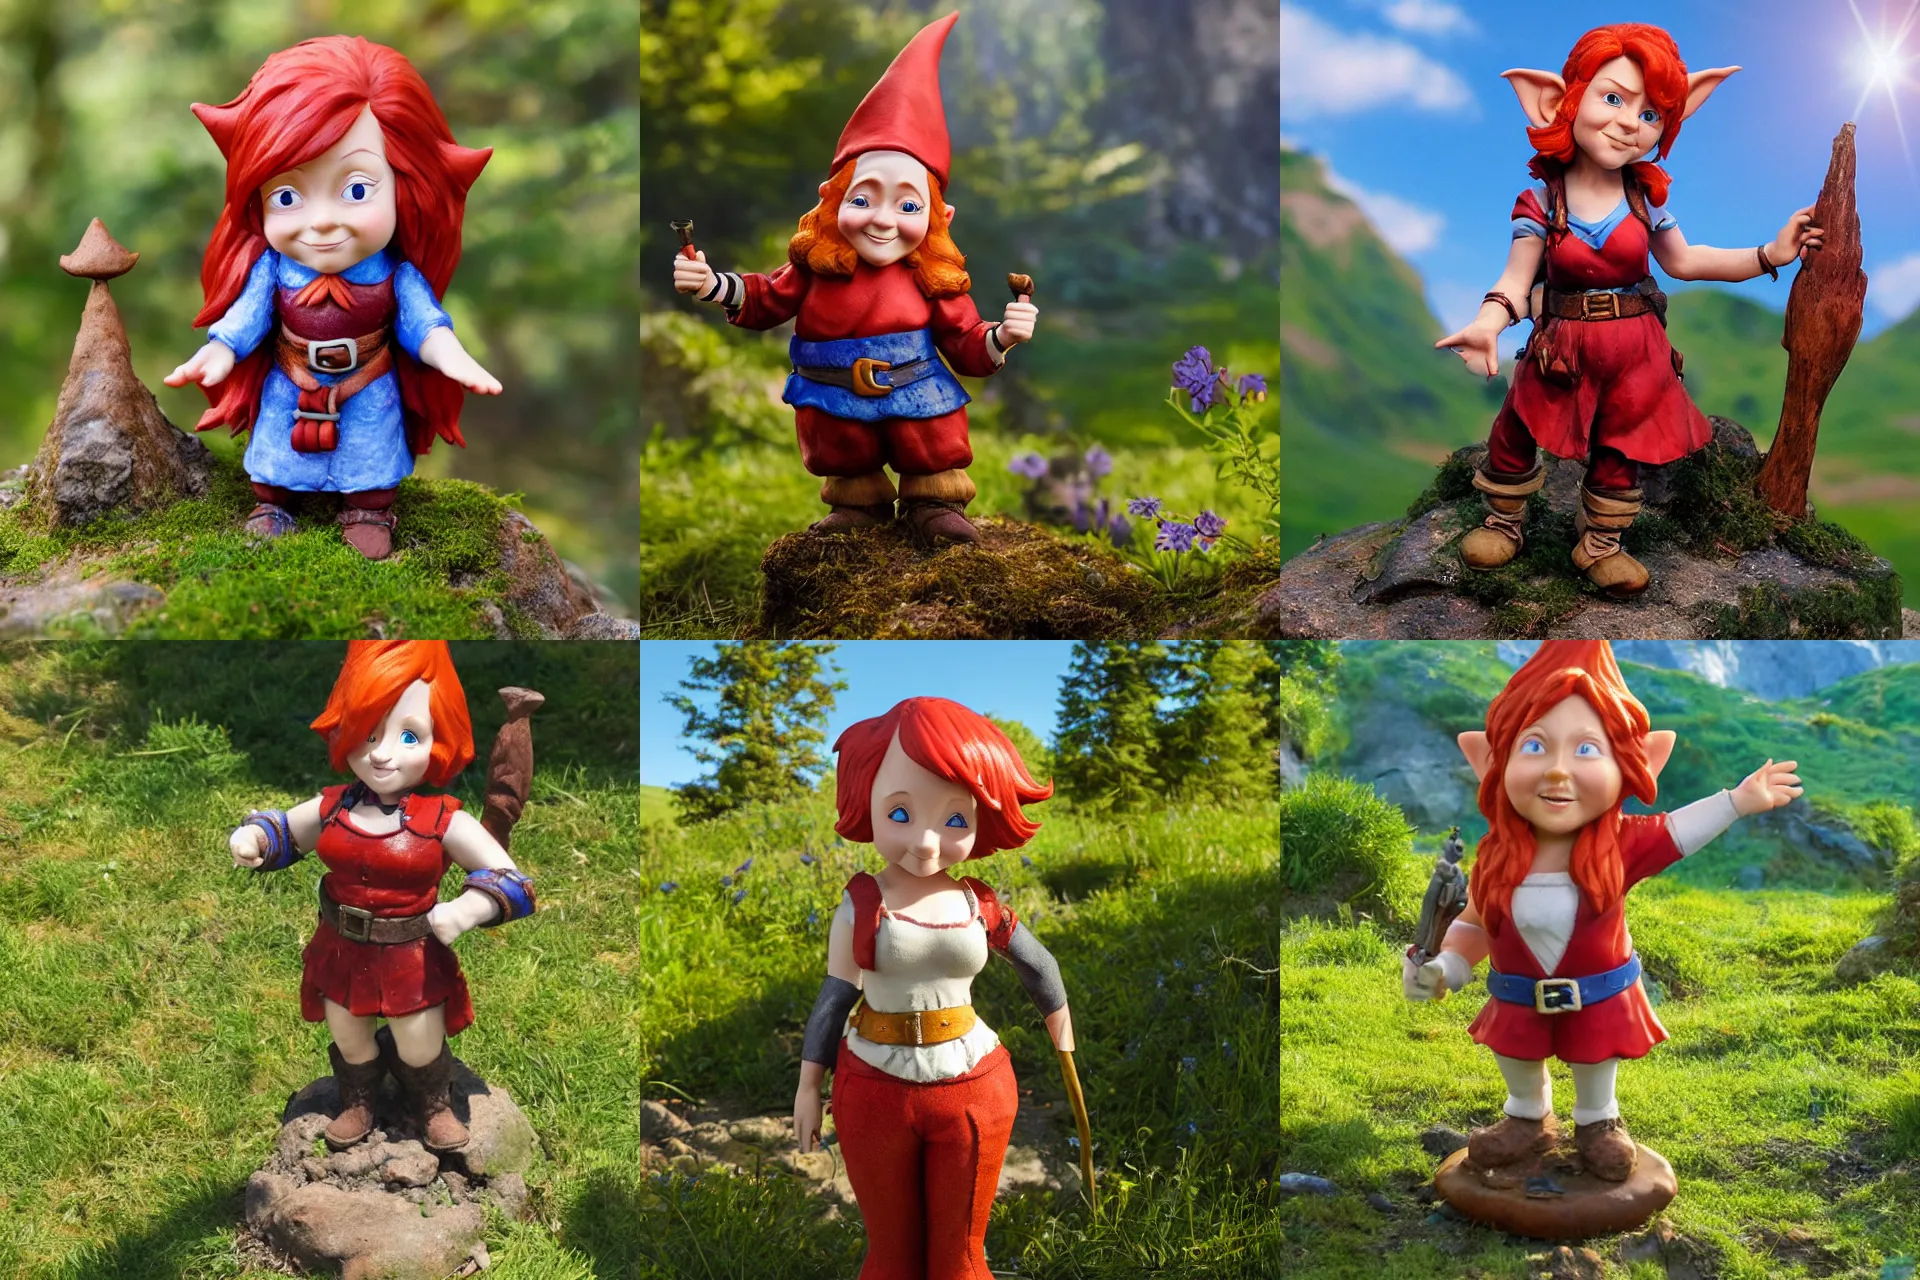 Prompt: short female red - headed fantasy gnome posing with arms out in sunlit valley, surrounded by motes of blue light